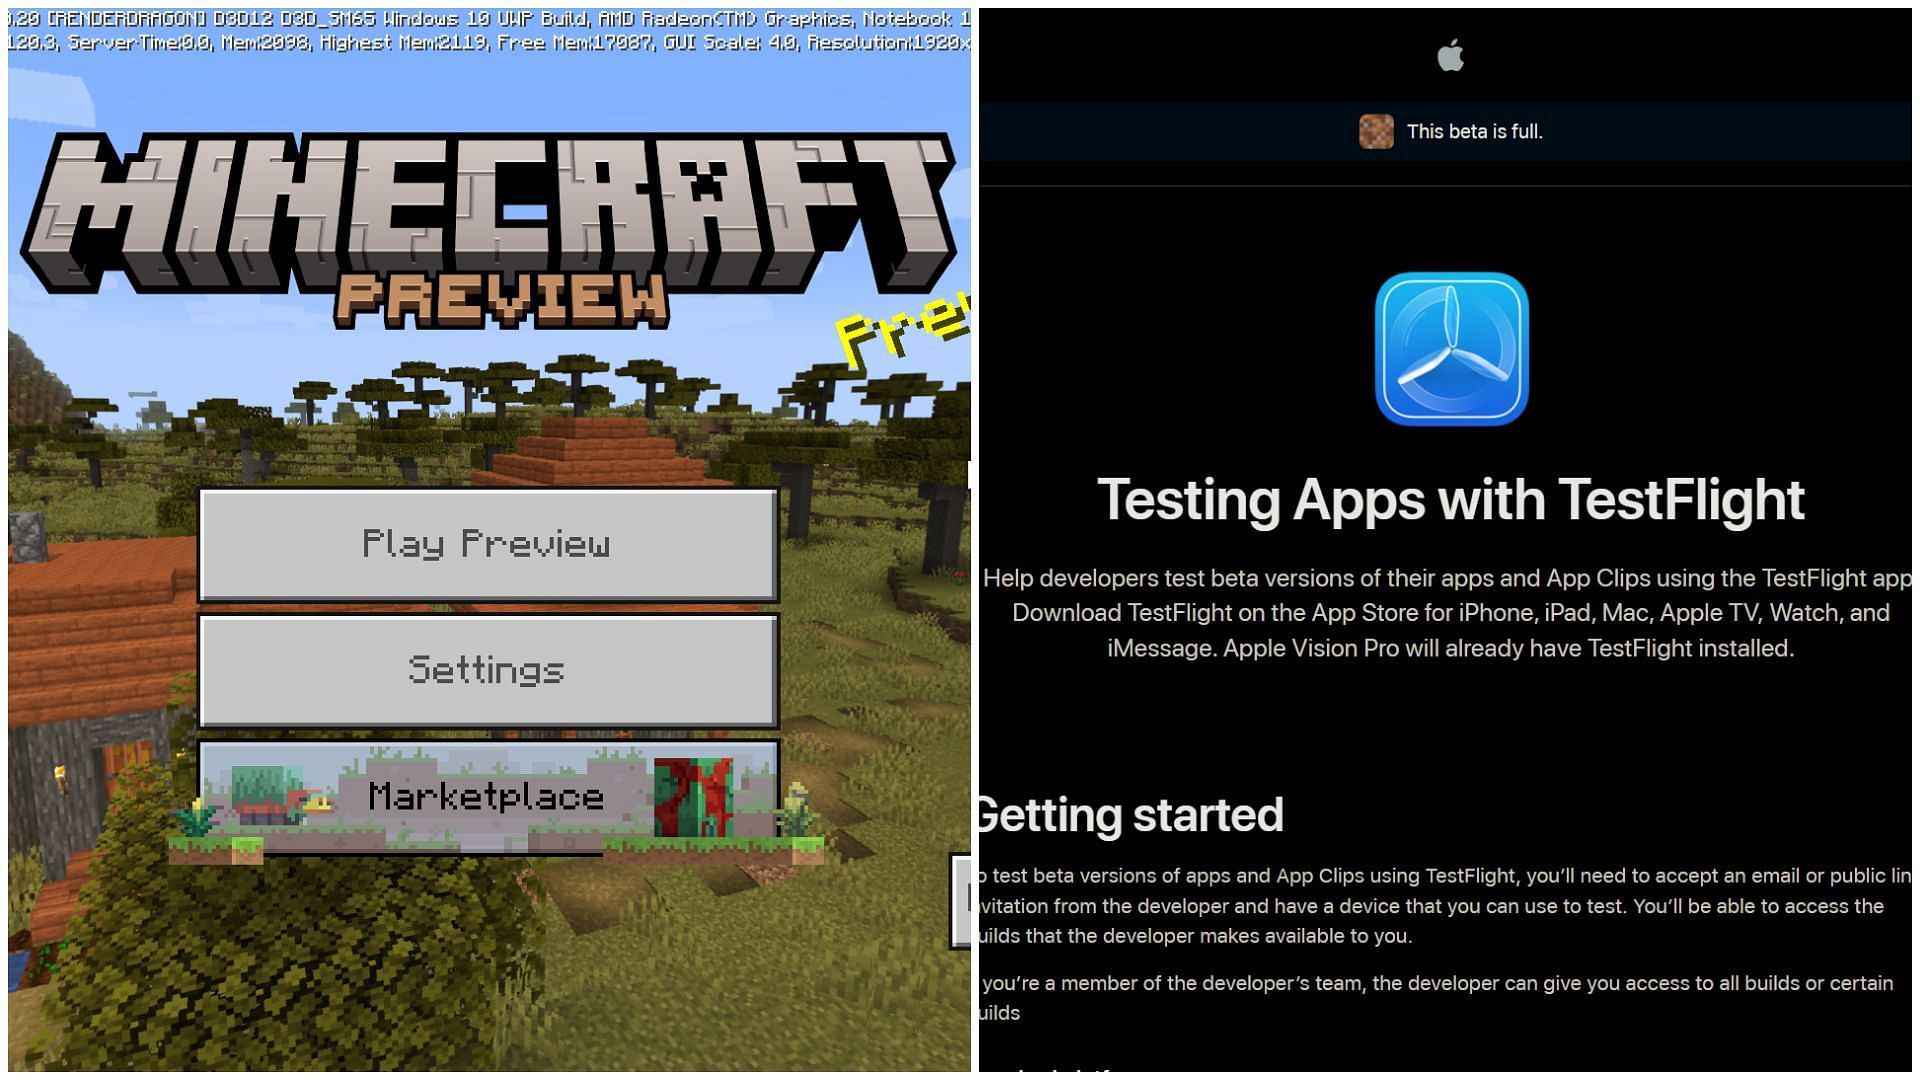 HOW TO DOWNLOAD MINECRAFT IN IPHONE